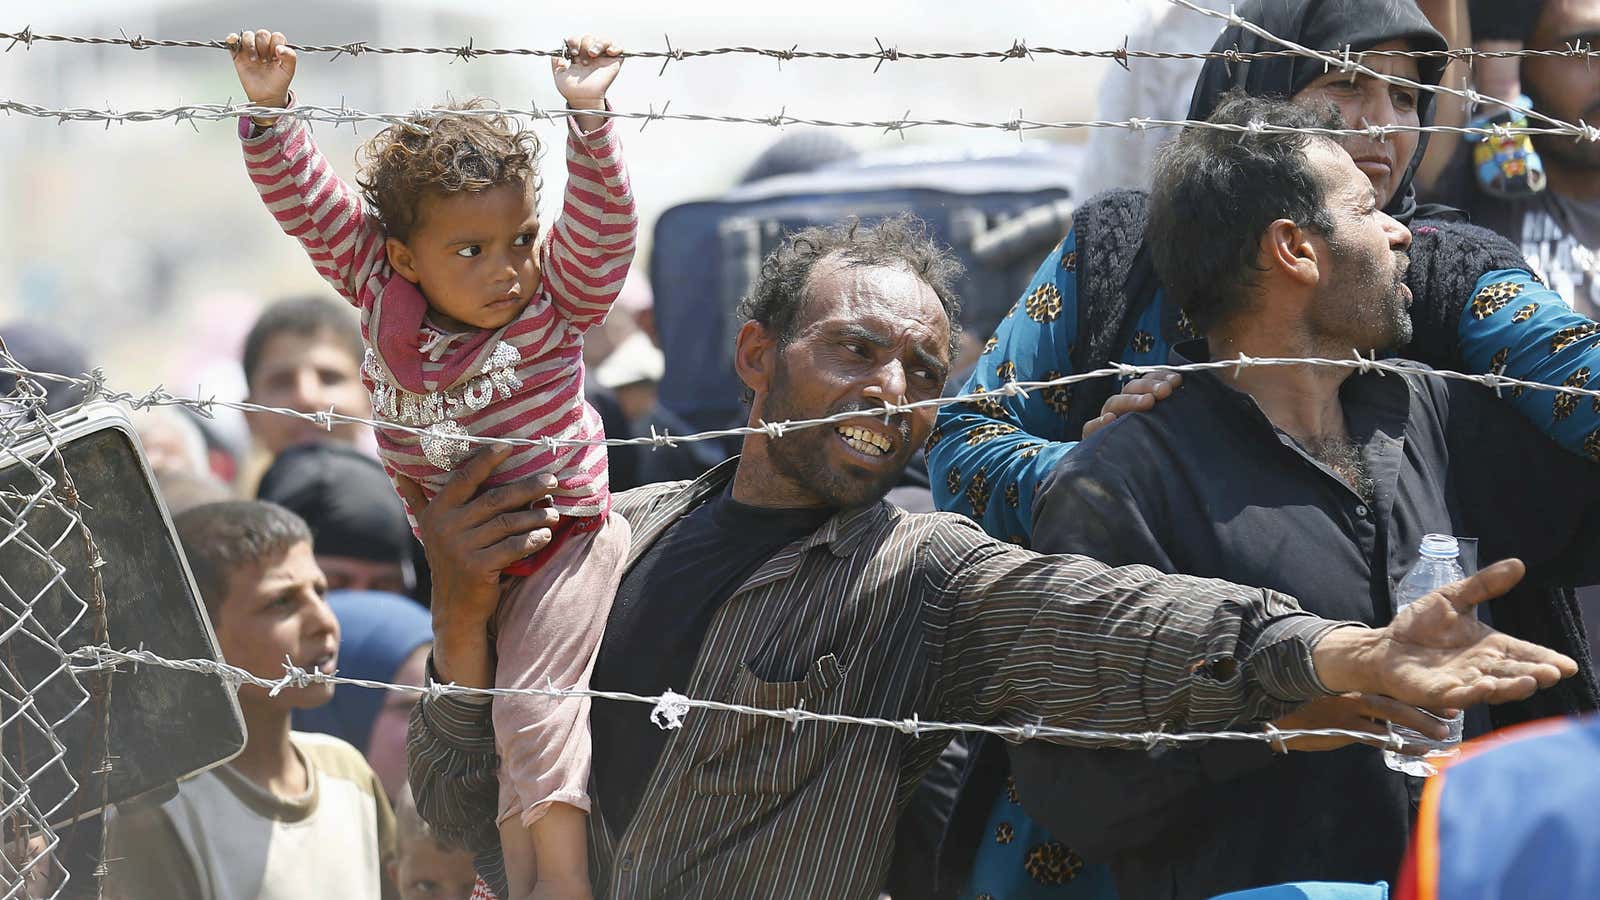 What’s the moral response to the refugee crisis?